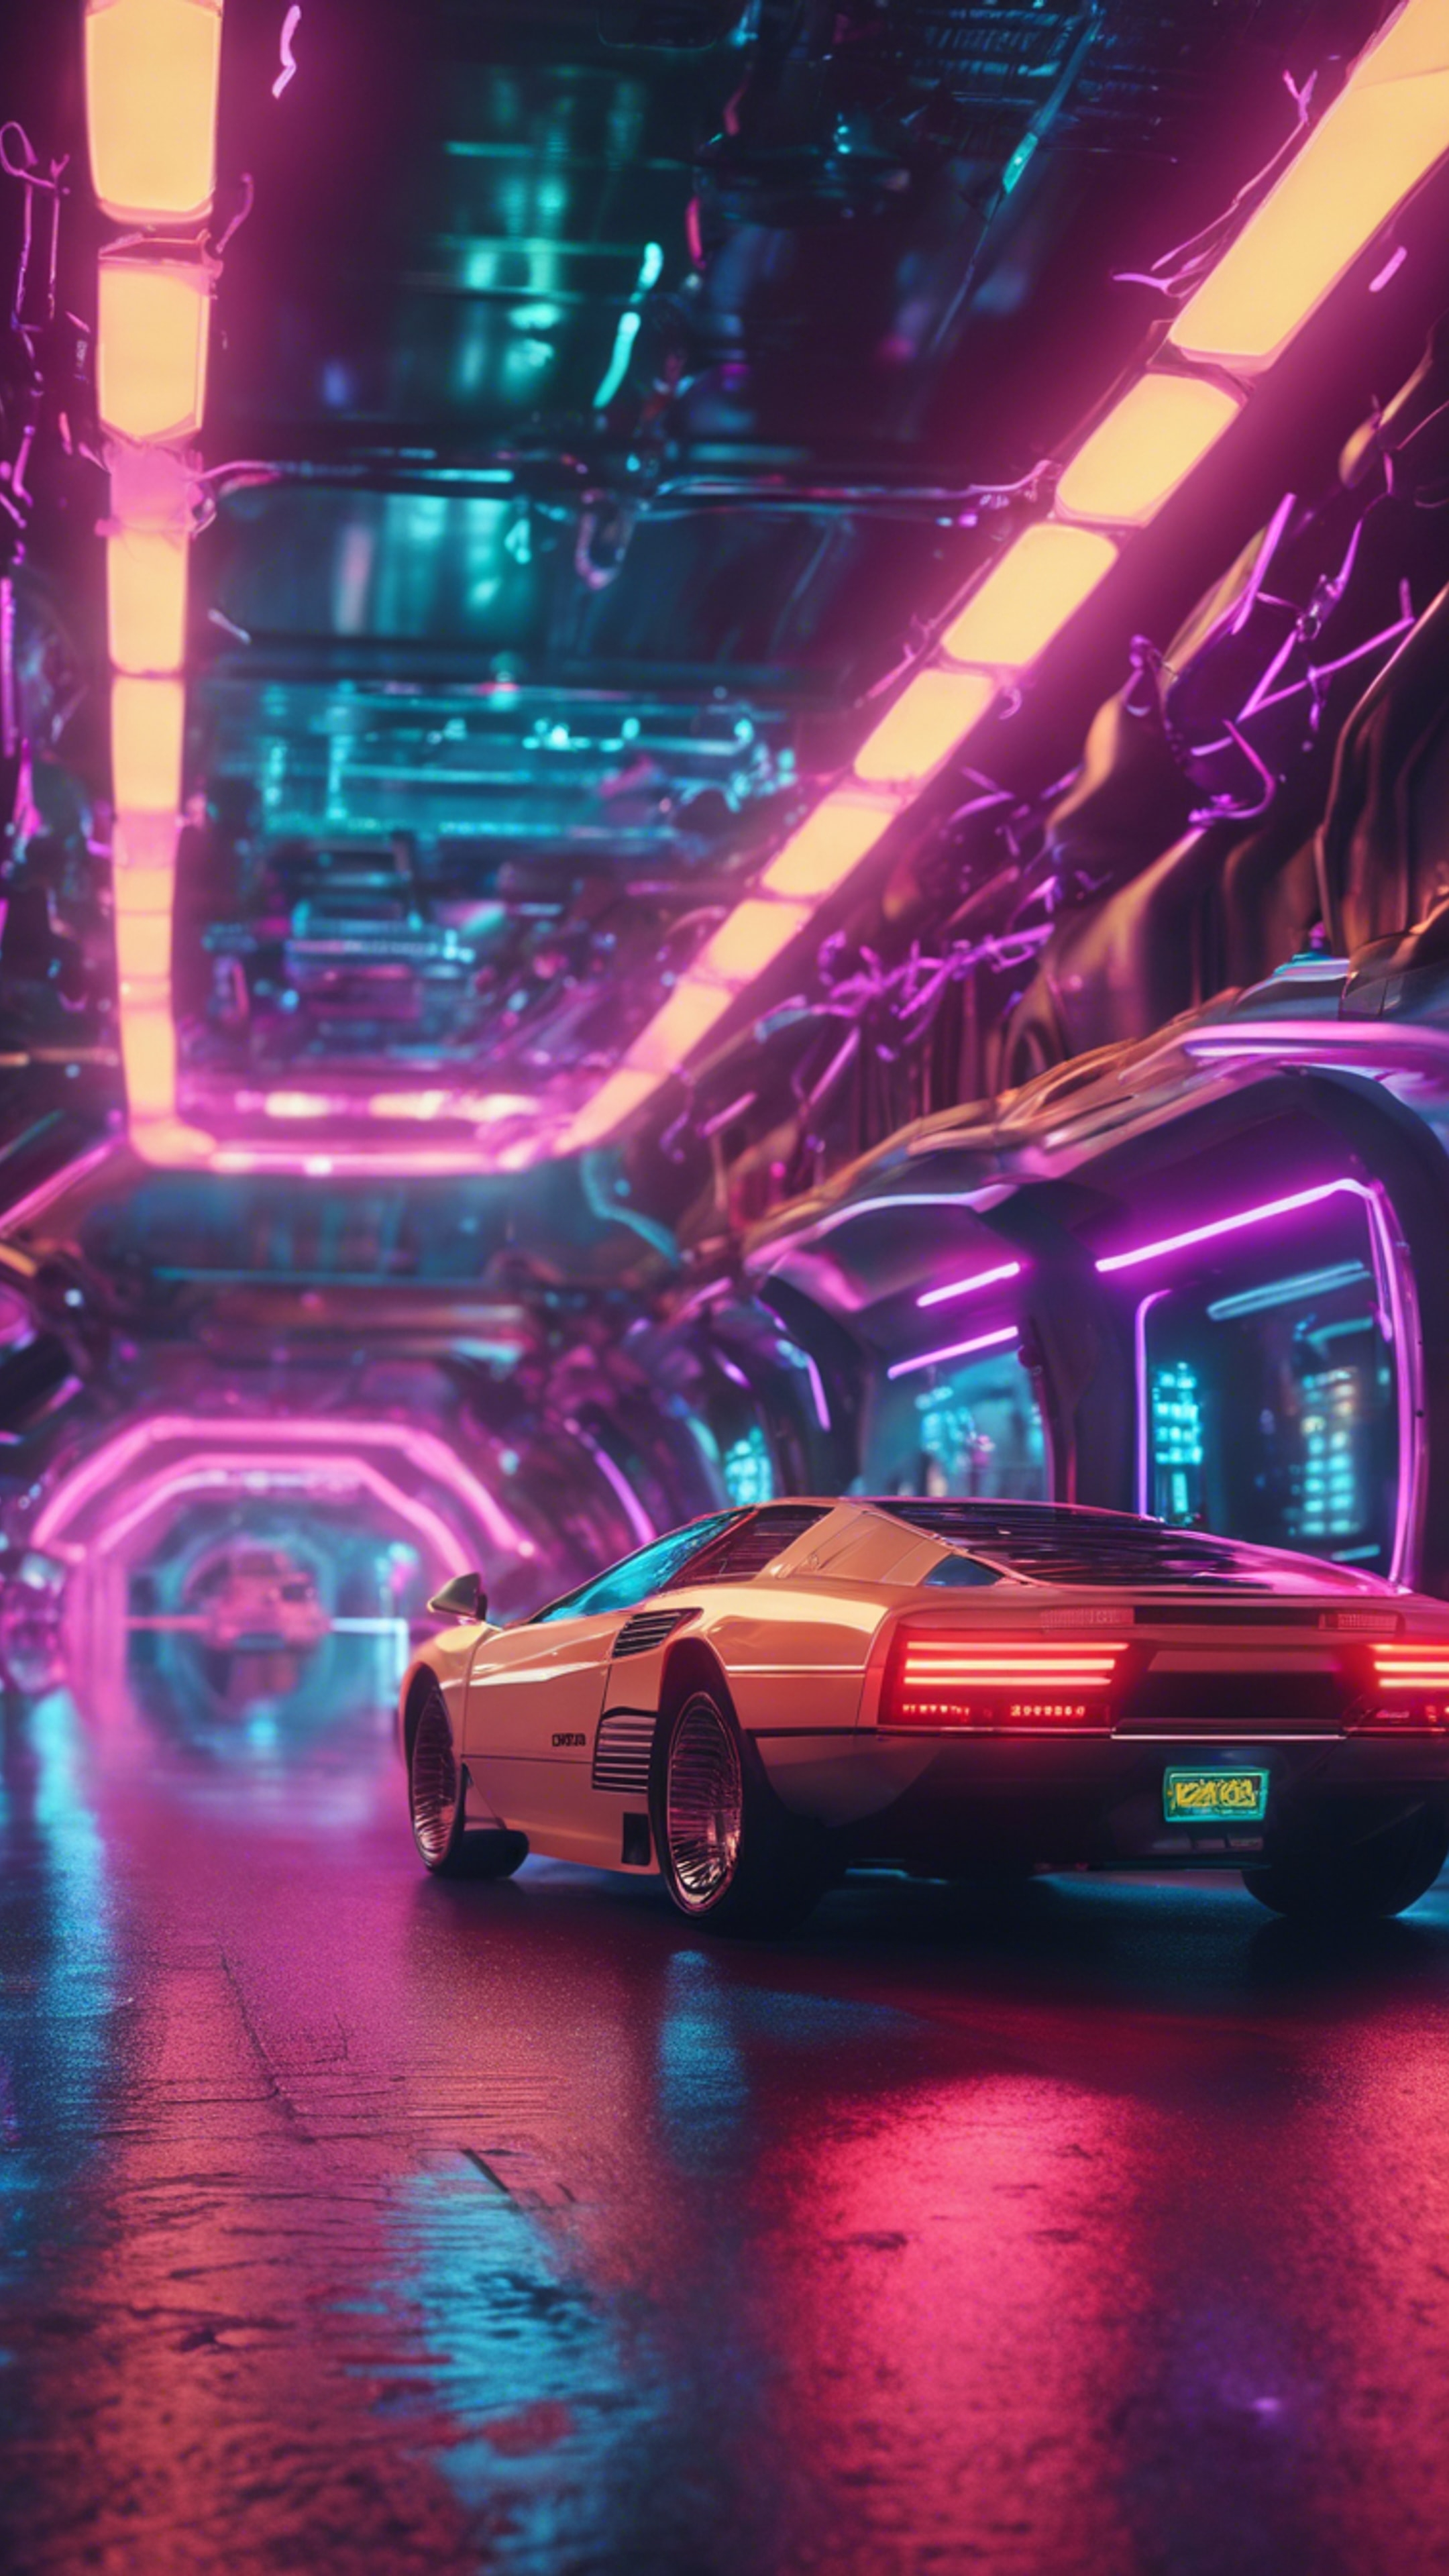 A Cyber-Y2K style chase scene with hover cars speeding through neon-lit tunnels. Валлпапер[a7b24e631c154bdda129]